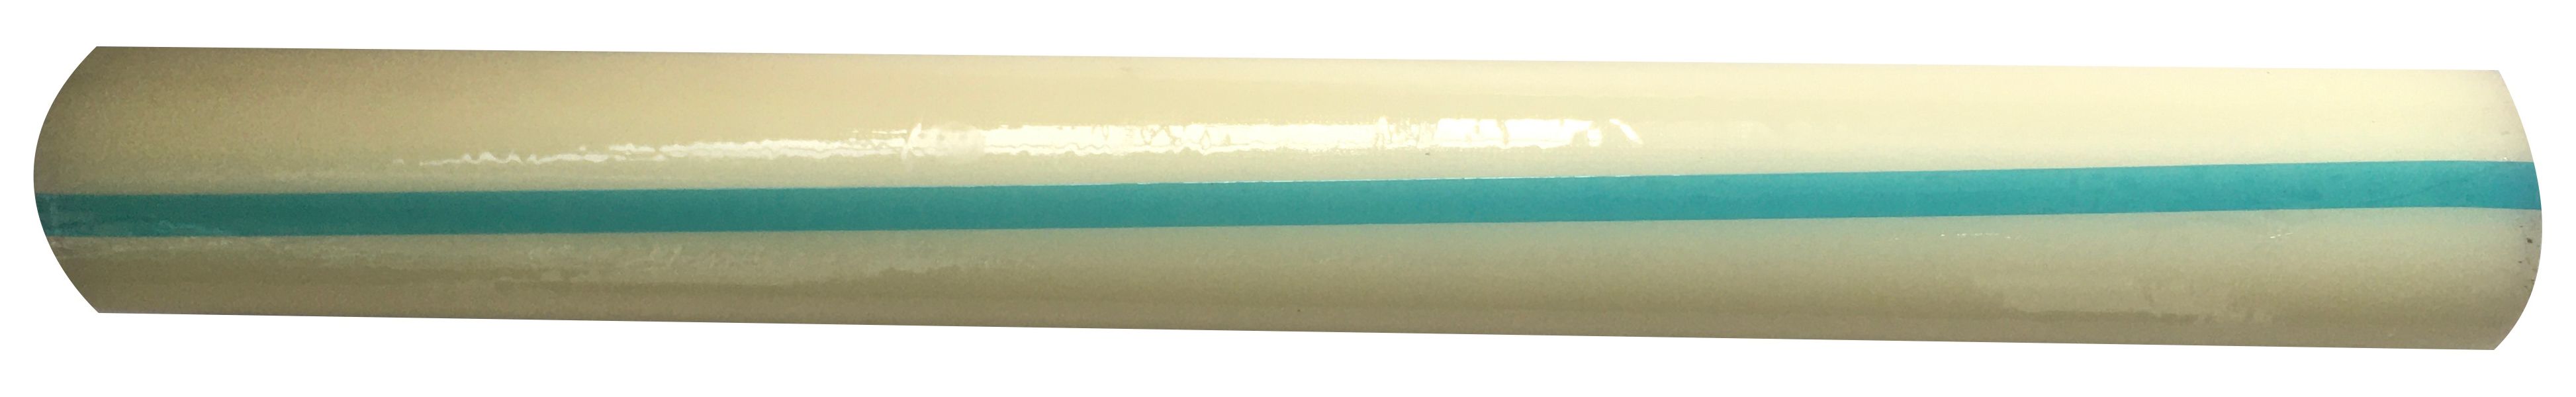 Image of Waterproof Polythene Carpet Protection Roll - 0.6 x 25m